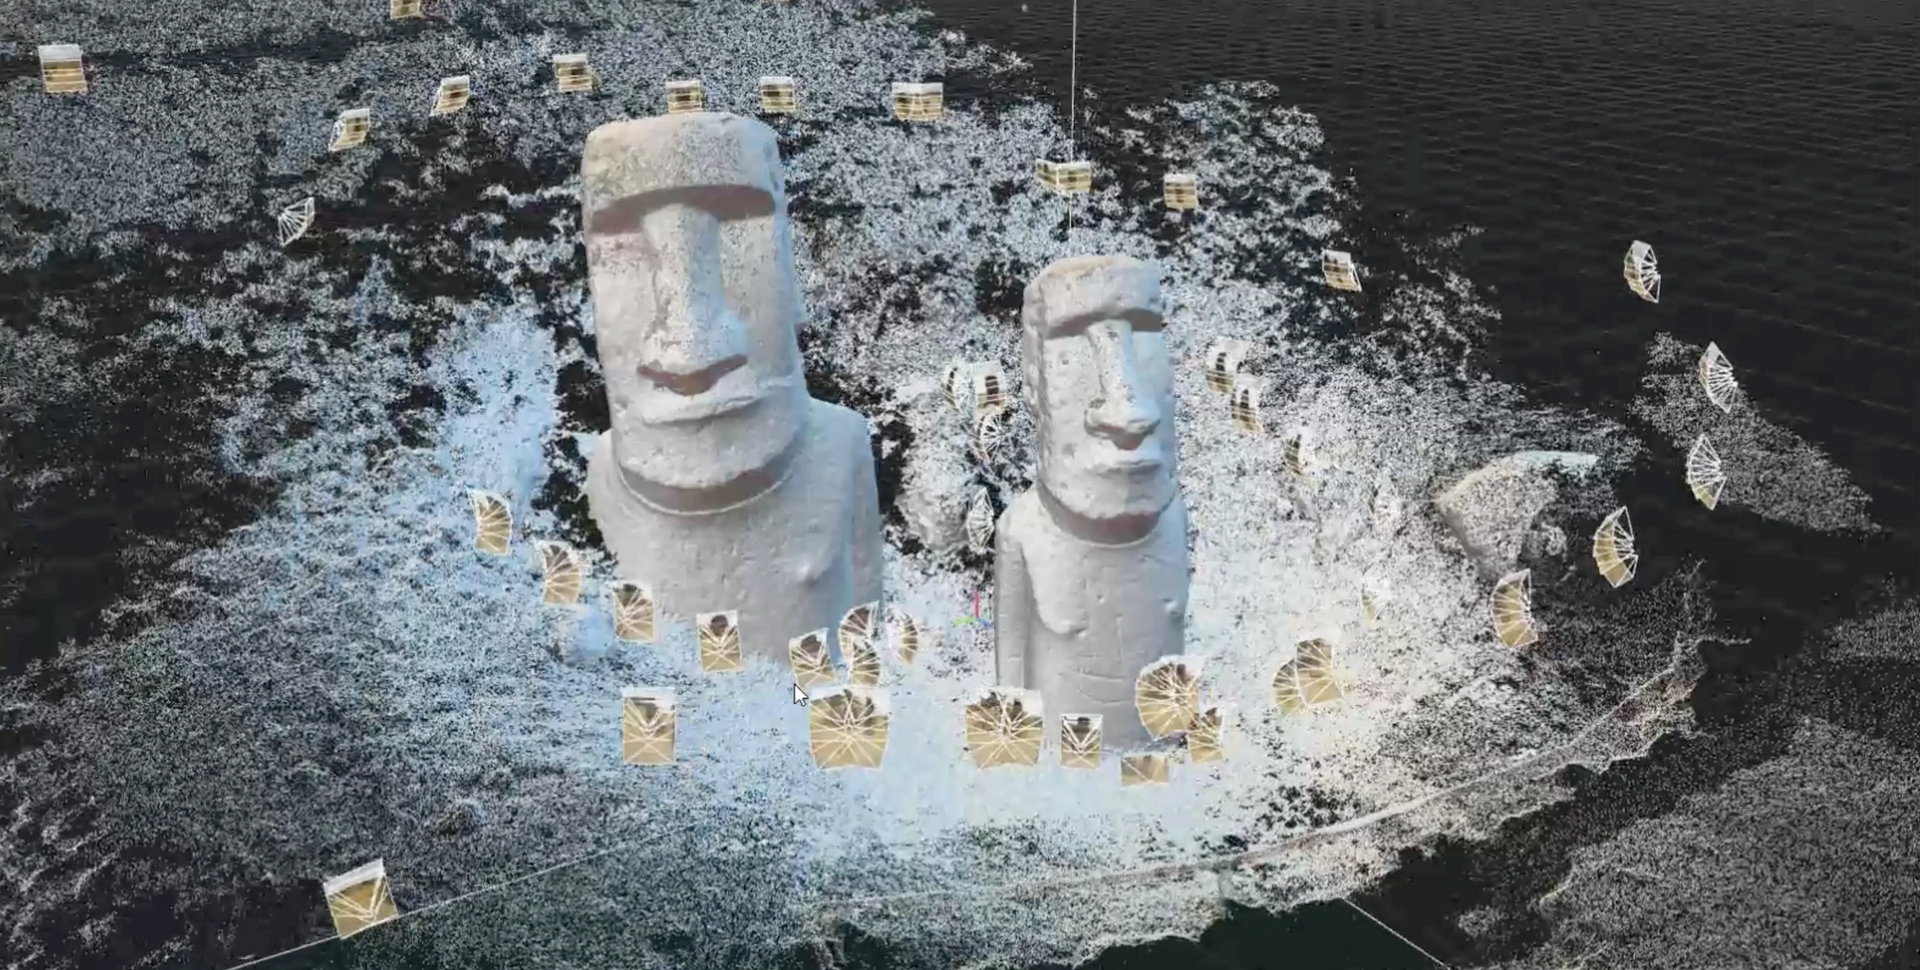 3D visuals of the stone heads at Rapa Nui for Google Arts & Culture's Heritage on the Edge project © CyArk/Google Arts & Culture